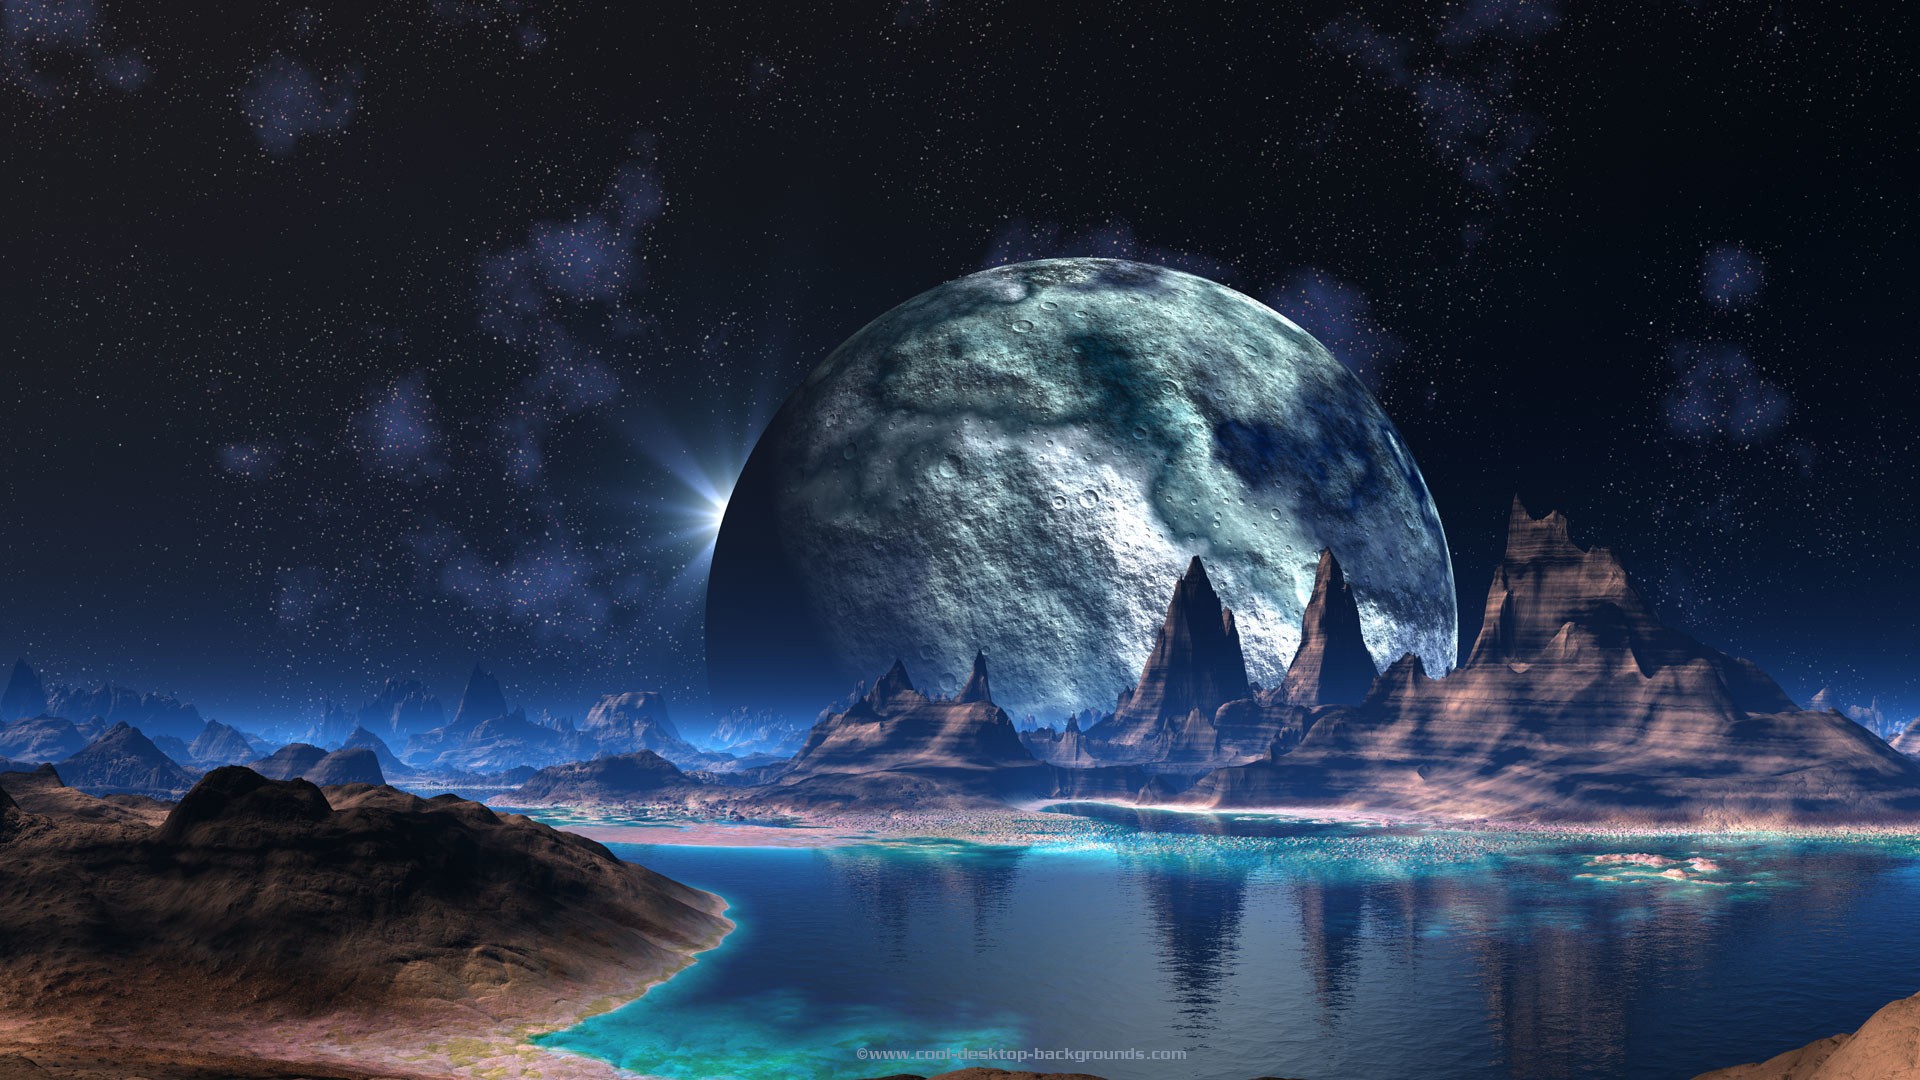 1920x1080 Astronomy images planets HD wallpaper and background photos